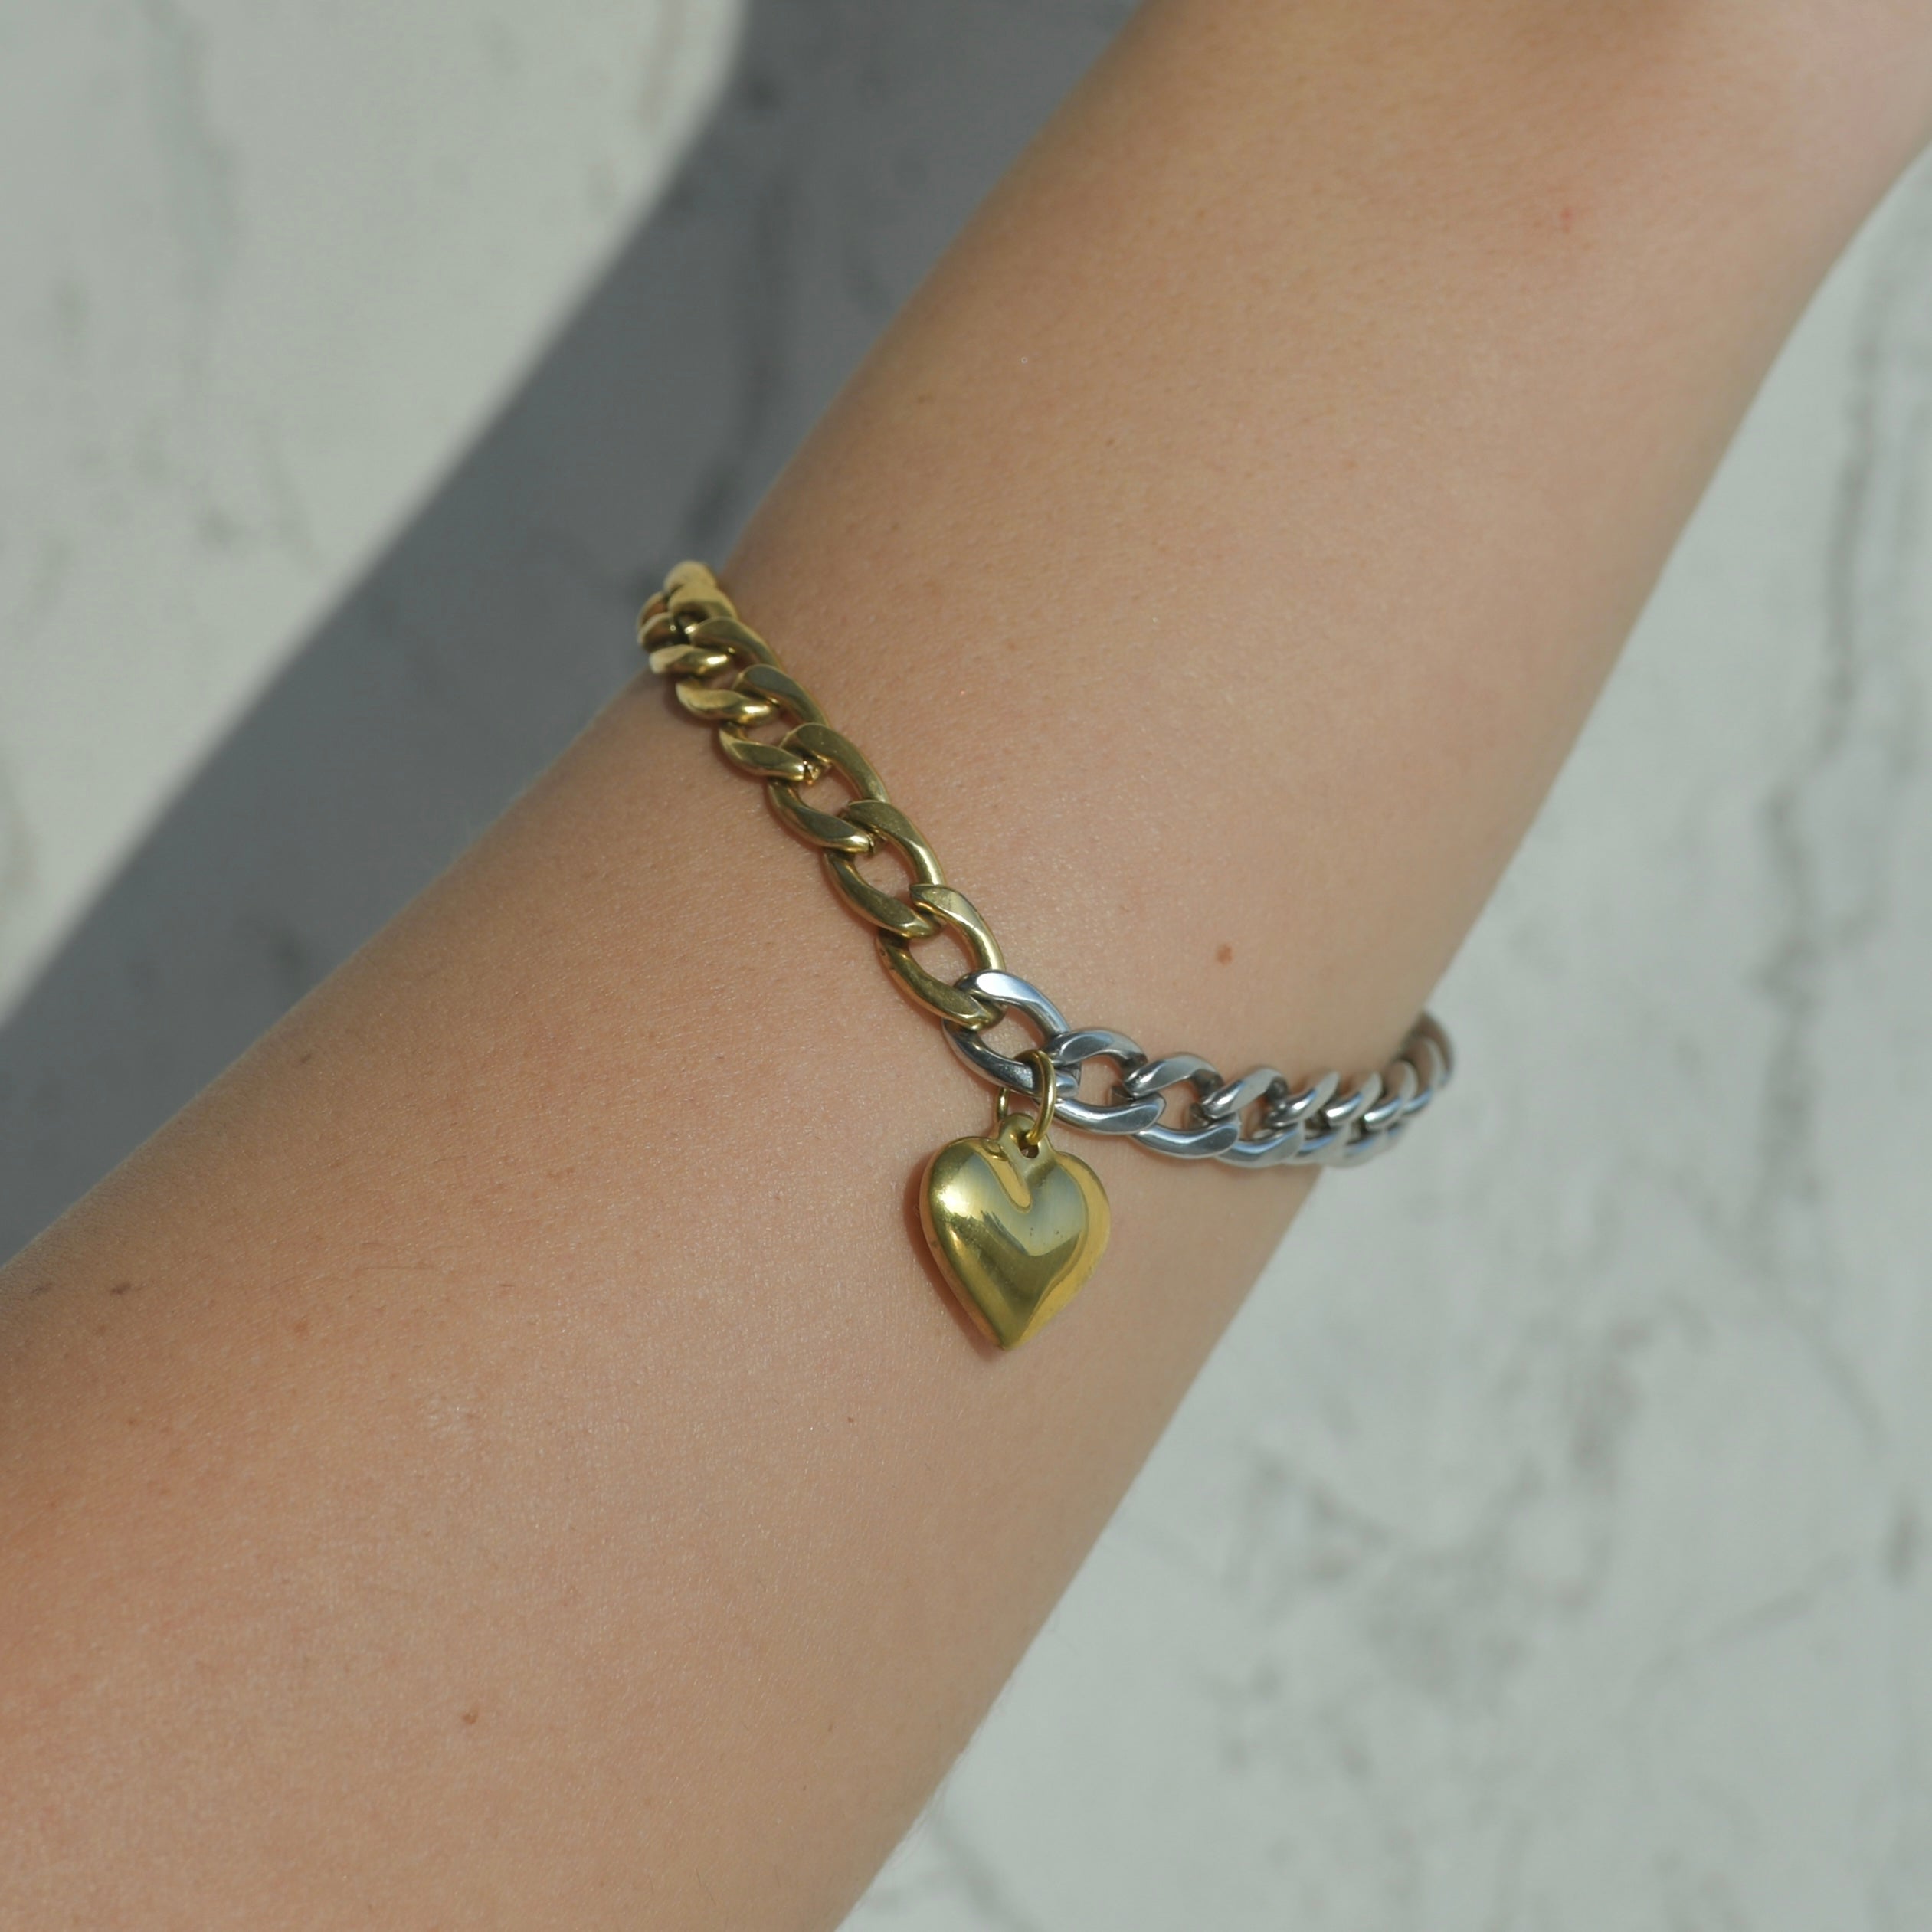 Cuban chain bracelet. Half gold and half silver with a gold heart pendant in the middle of the bracelet.